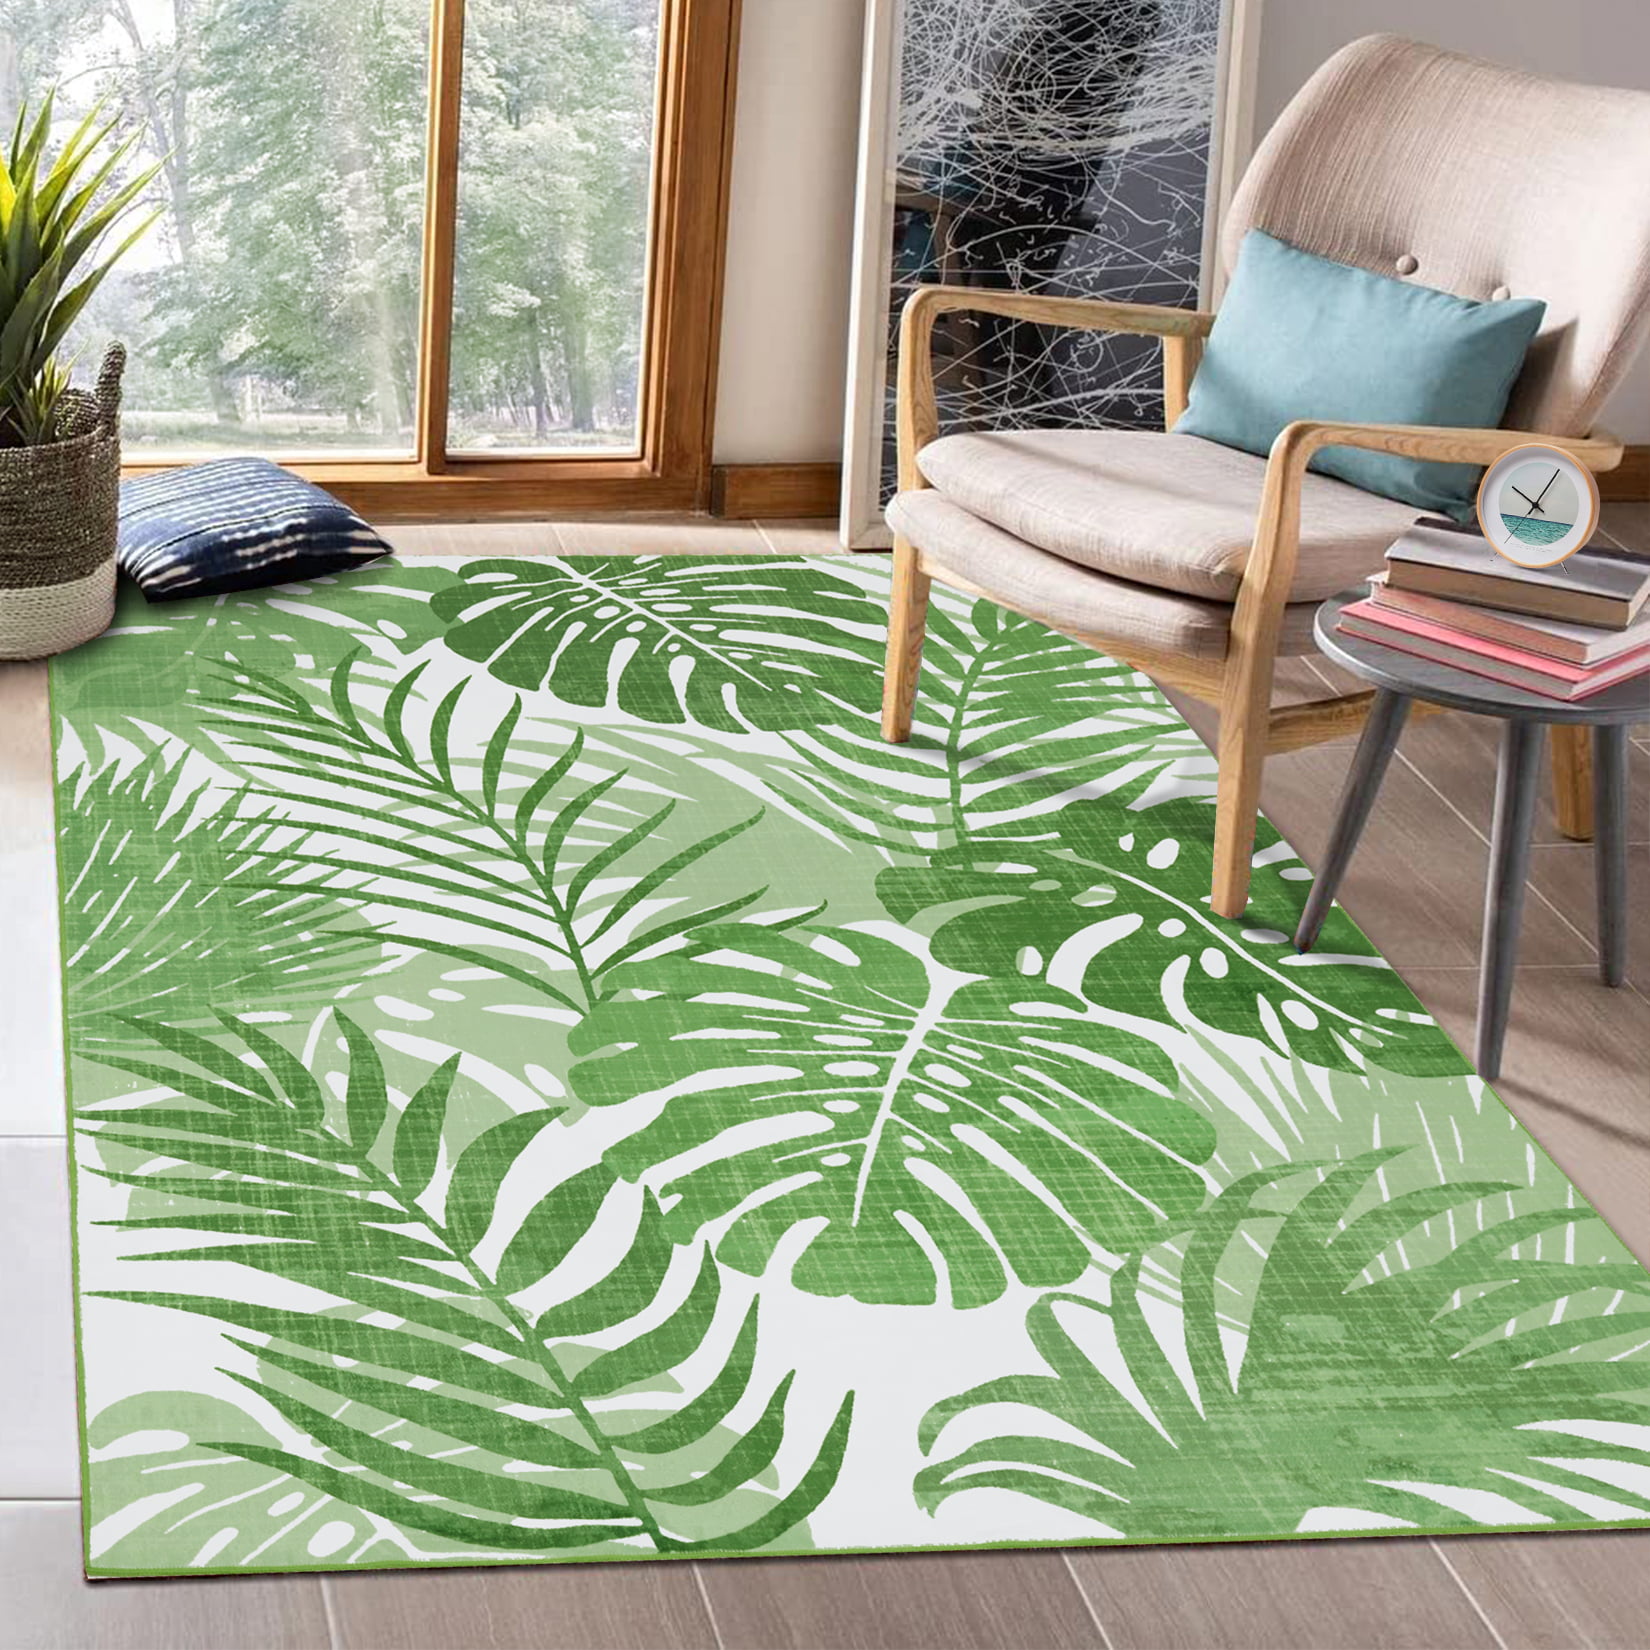 3x4 Rug, Sunset Rugs for Living Room Bedroom, Tropical Palm Tree Area Rug &  Bedroom Decor, Washable Non Slip Soft Low Pile Indoor Carpet, Home